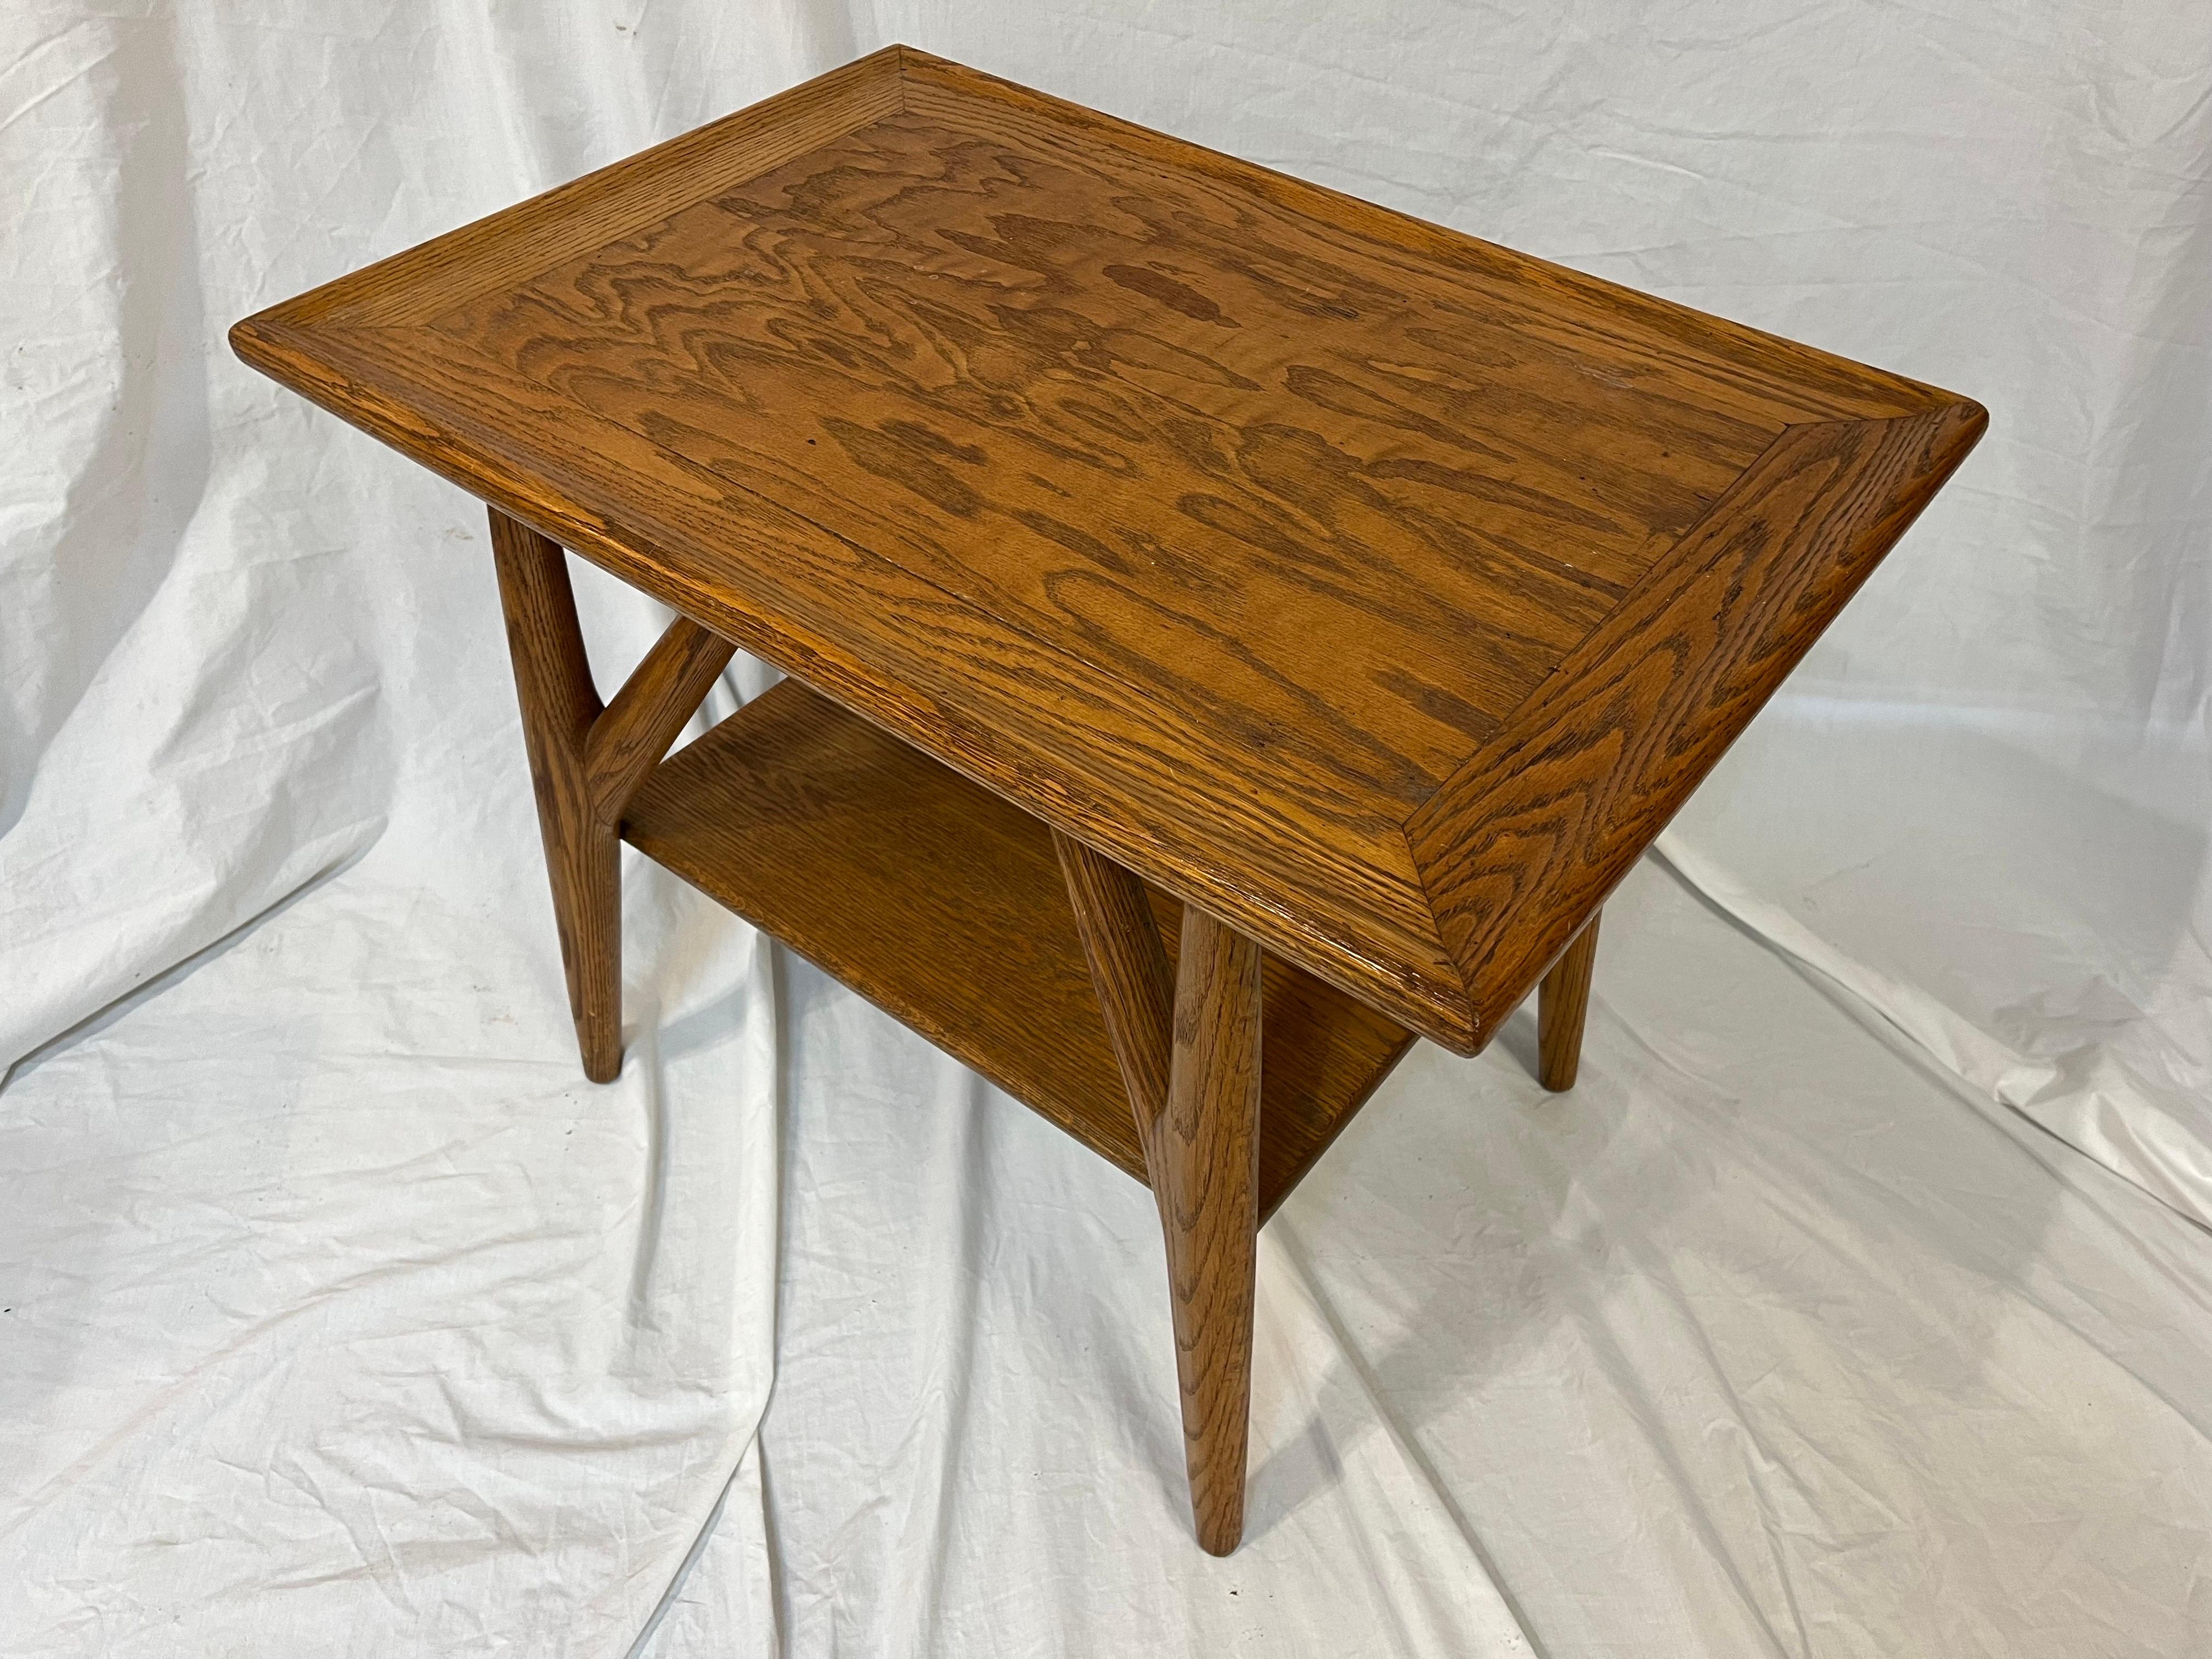 A Jack Van der Molen Mid-Century Modern oak wood side or end table. With a strong, pronounced grain and a confident style, this piece of American design history is ready for your interior. A bit of information from the Warehouse 414 website on the